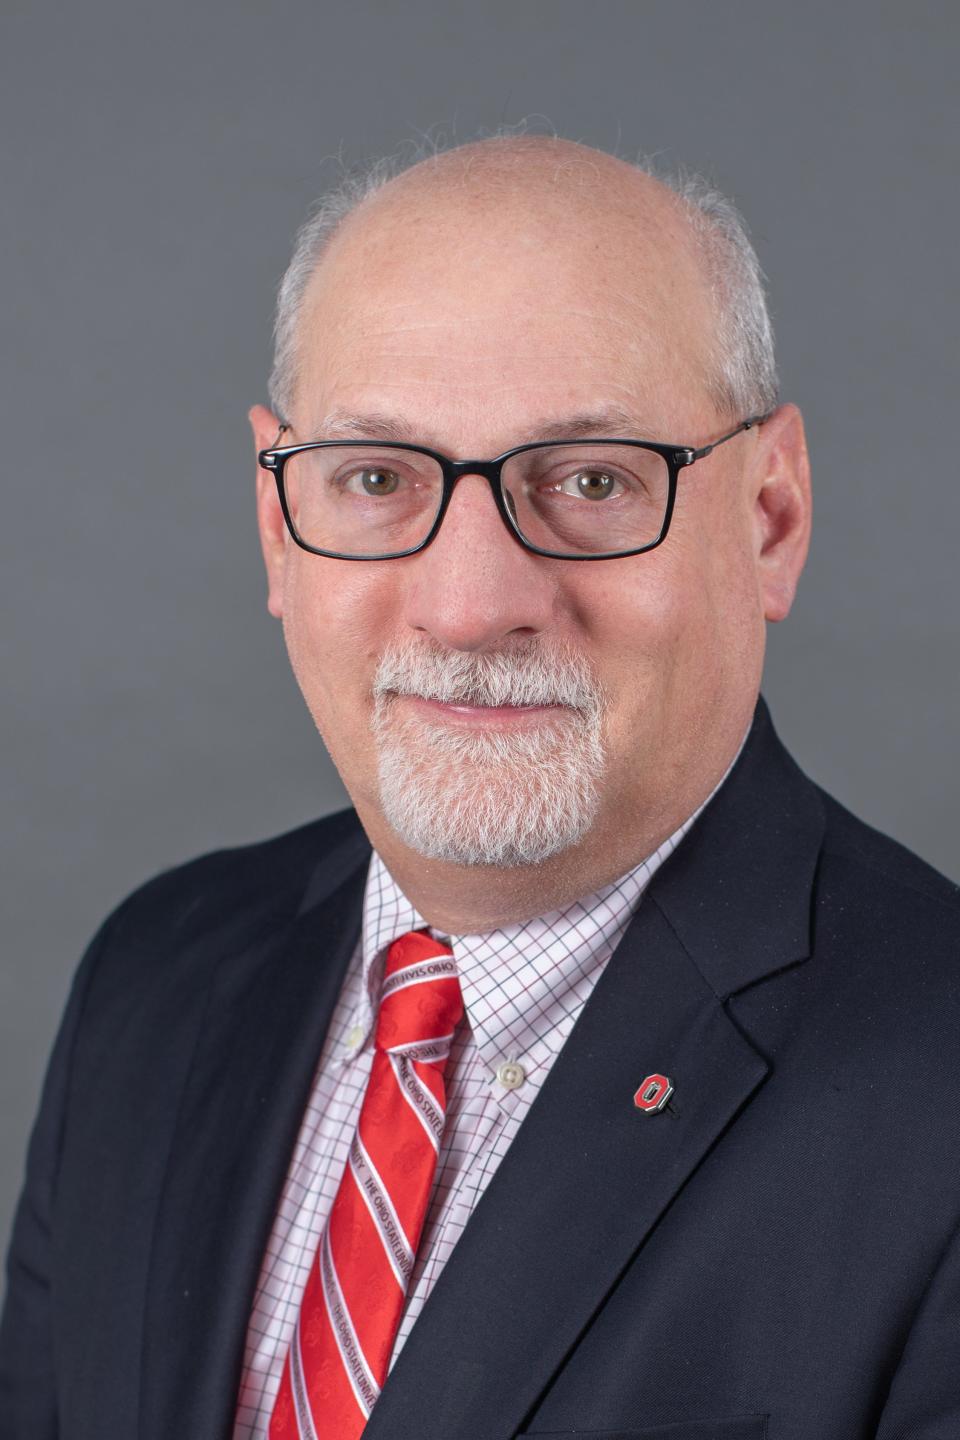 State Senator Bill DeMora (D-Columbus) represents Ohio’s 25th Senate District, which encompasses areas of Franklin County, including Clintonville, Upper Arlington, Grandview Heights, South Linden, Italian Village, Victorian Village, Ohio State University, and Northland.